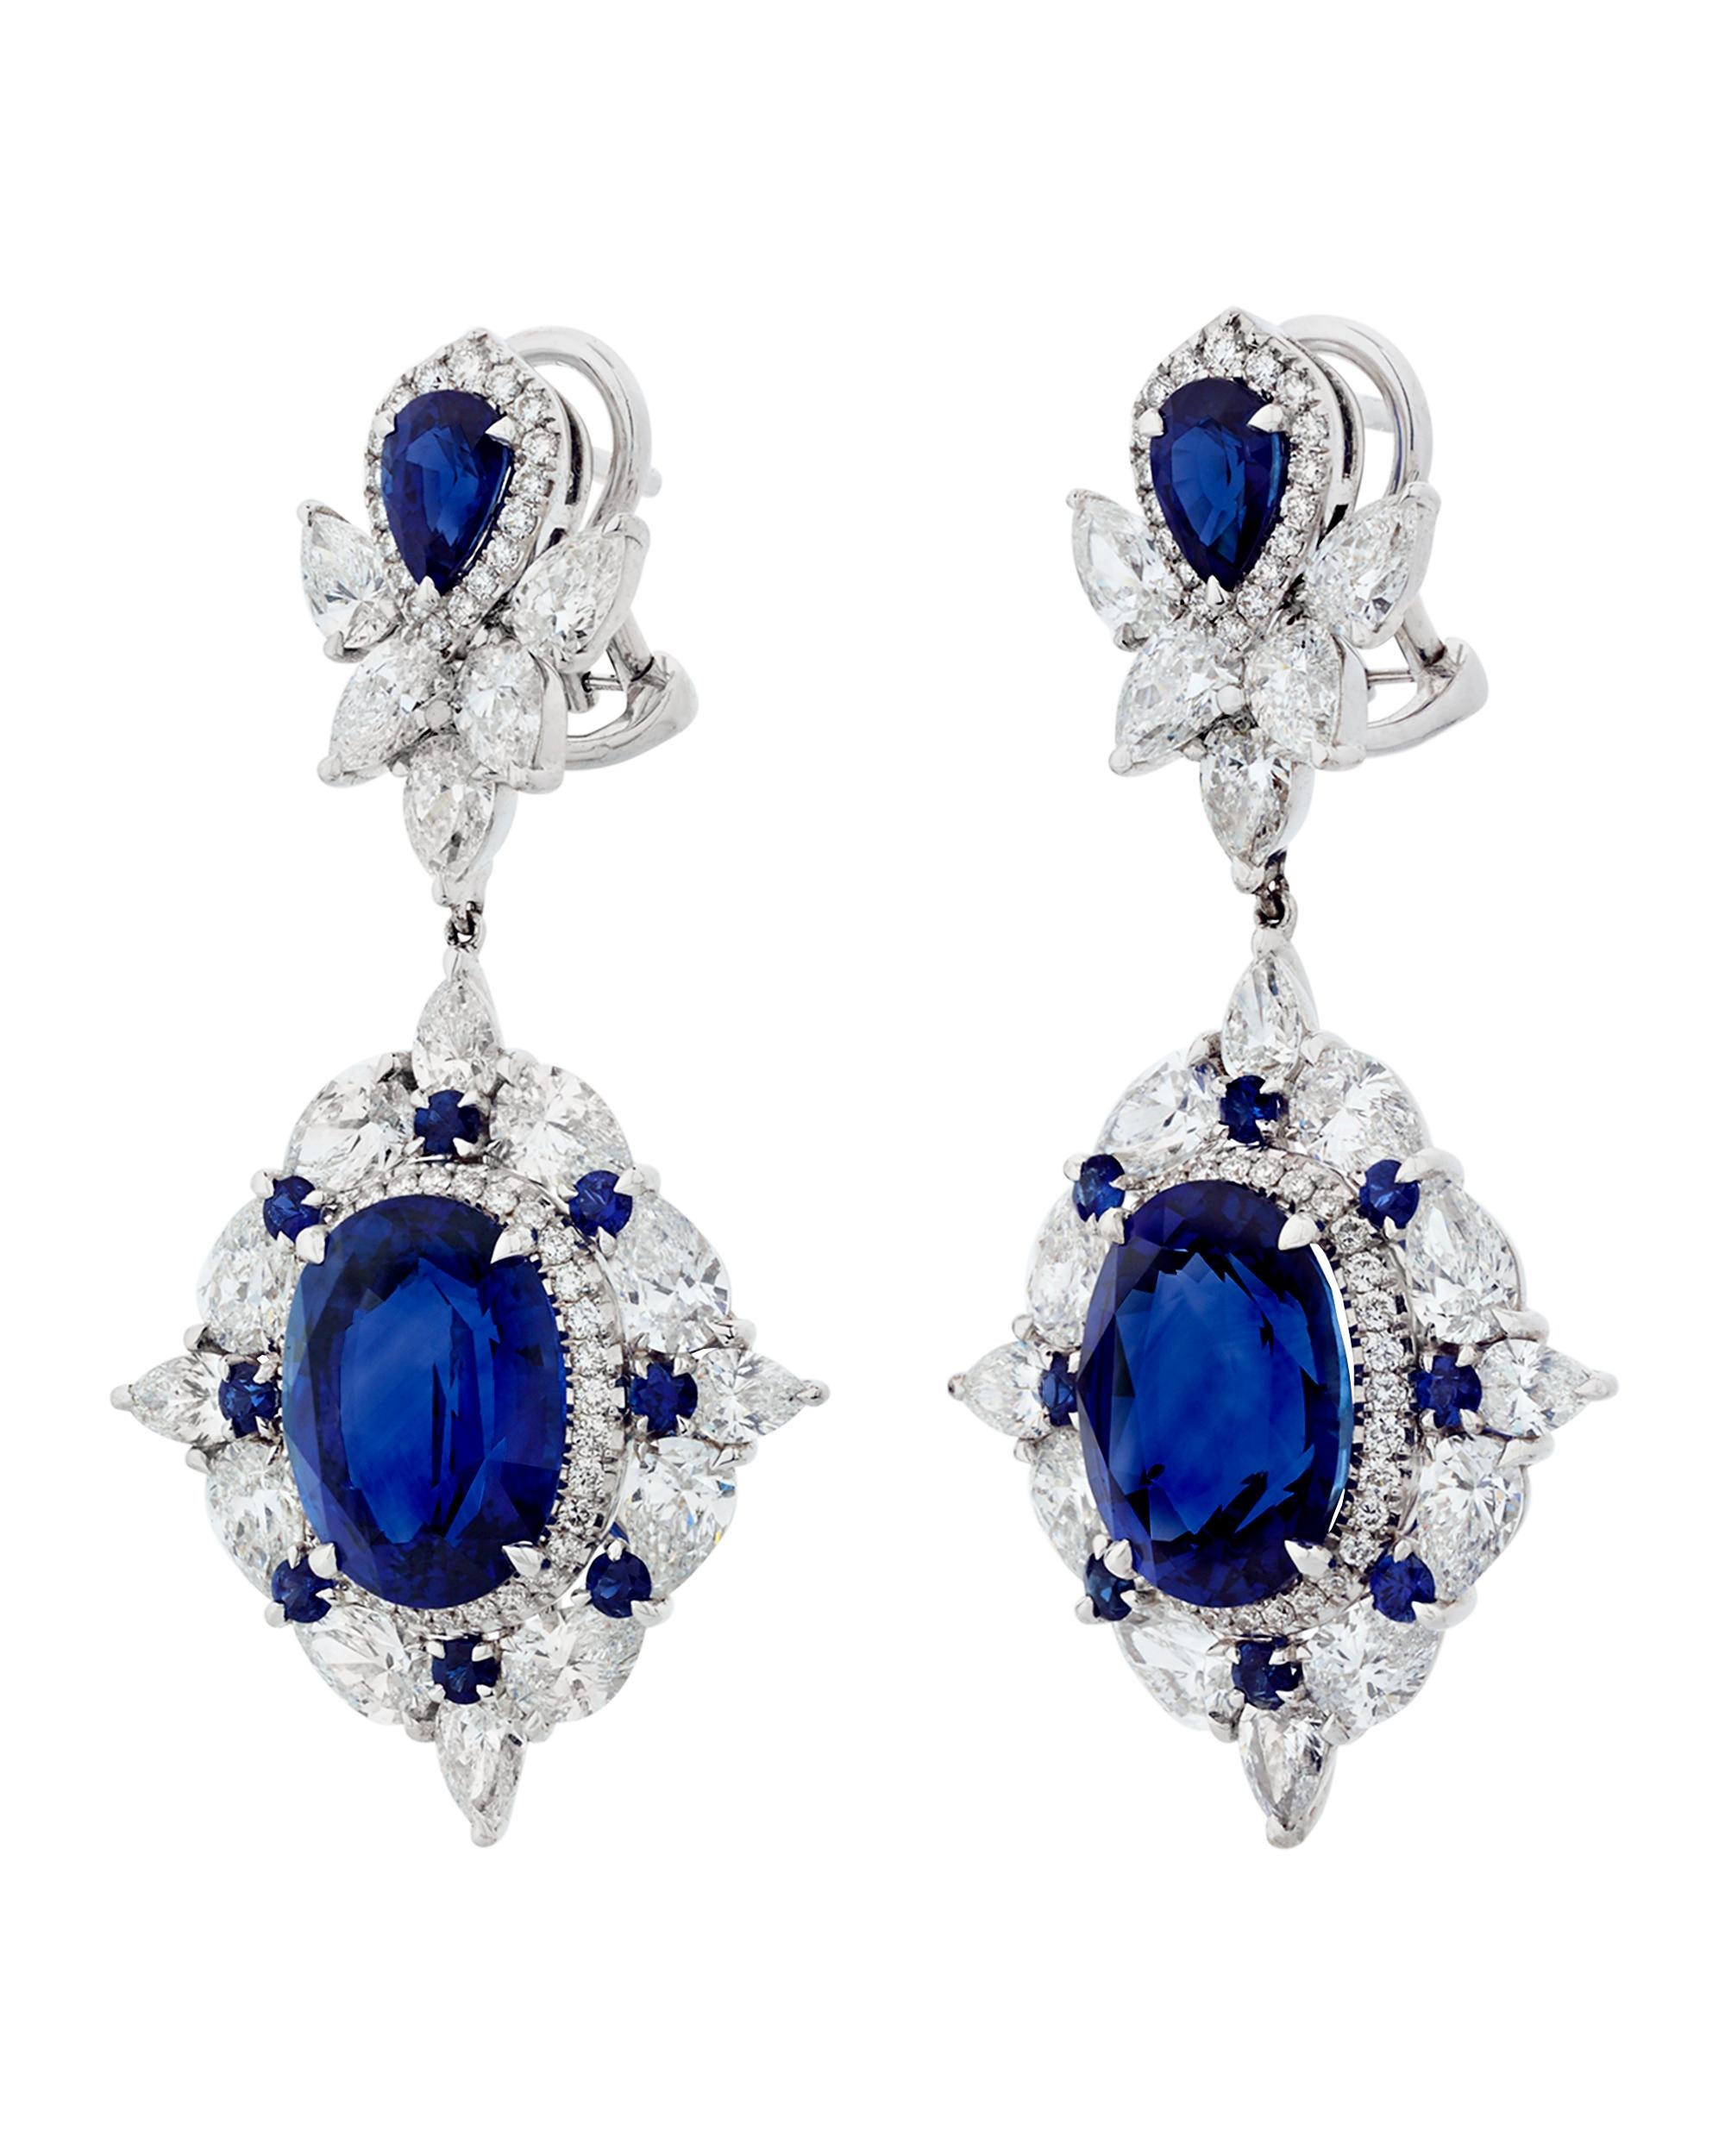 The 10.80 carats of sapphires in these graceful dangle earrings bear the unmistakable, velvety blue color of sapphires hailing from Ceylon, or modern-day Sri Lanka. Accompanying these glorious blue jewels are 2.12 total carats of lush white